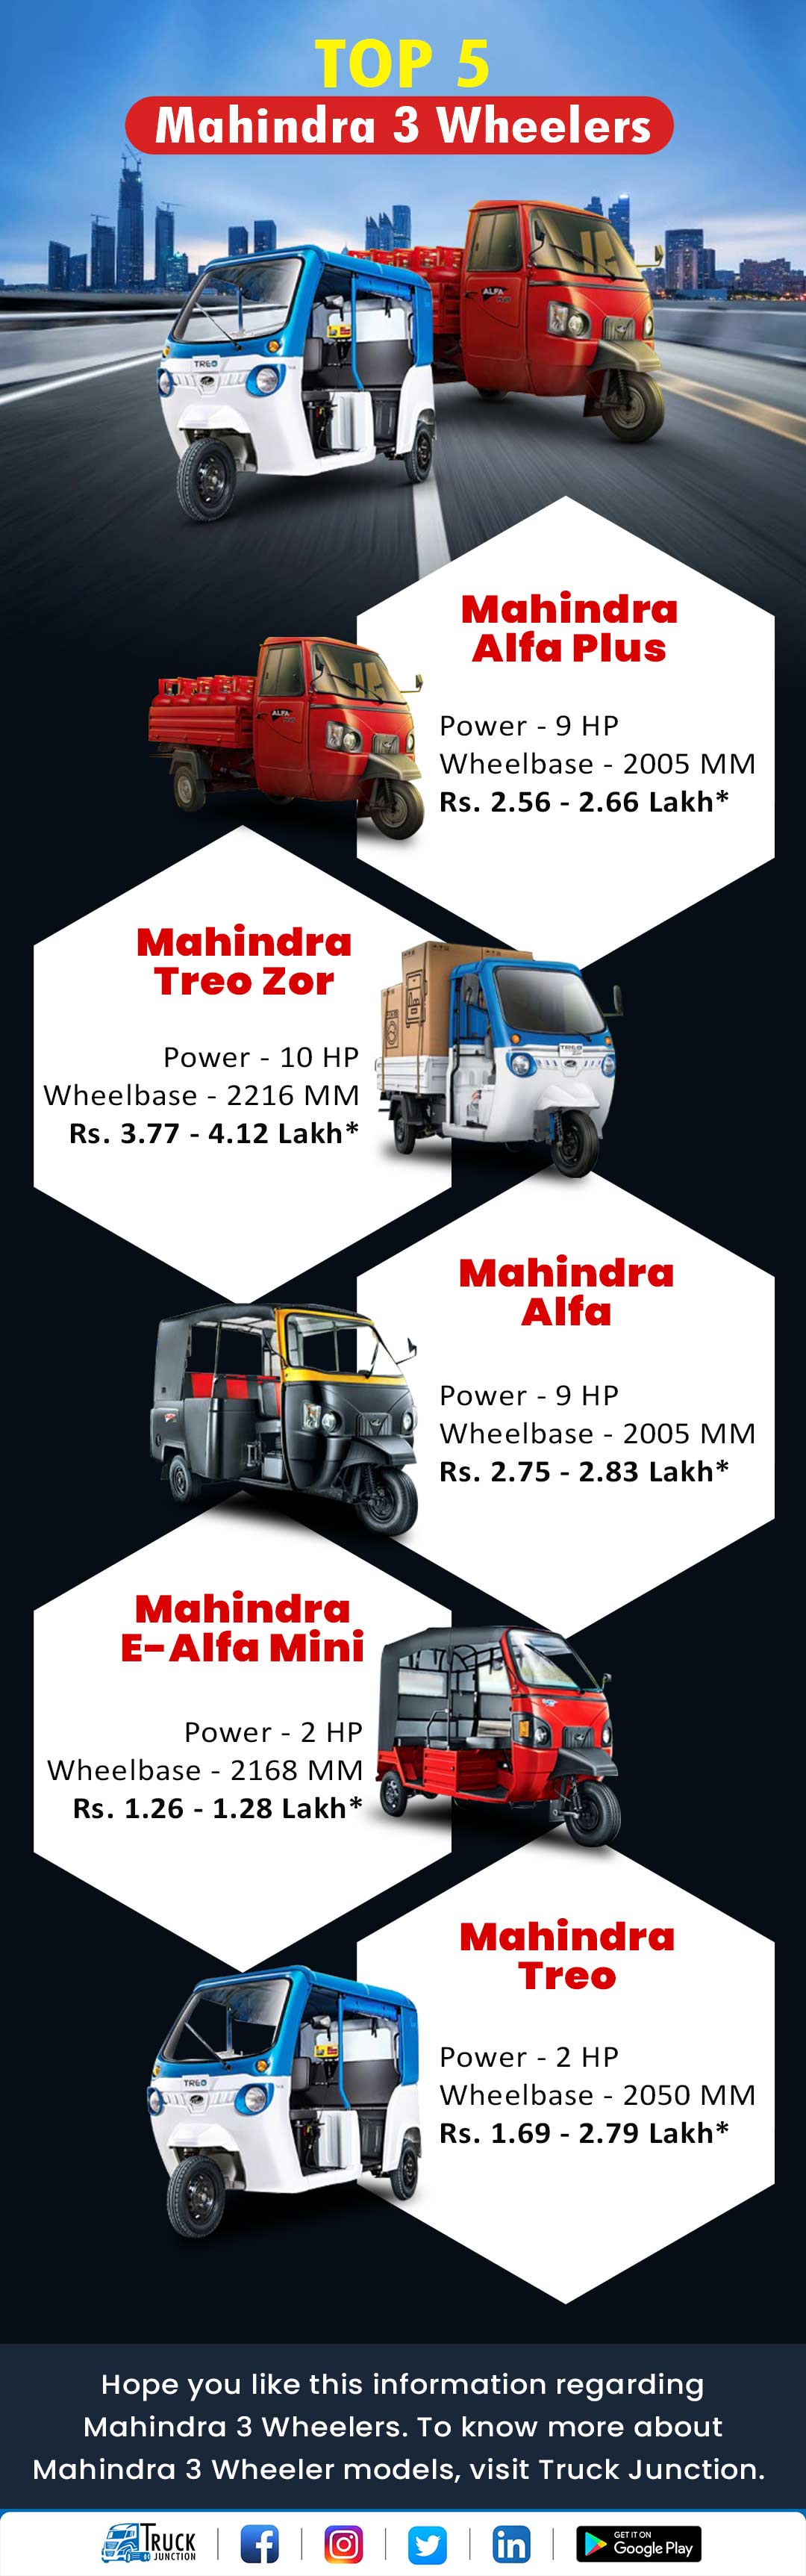 Top 5 Mahindra 3 Wheelers in India - Infographic